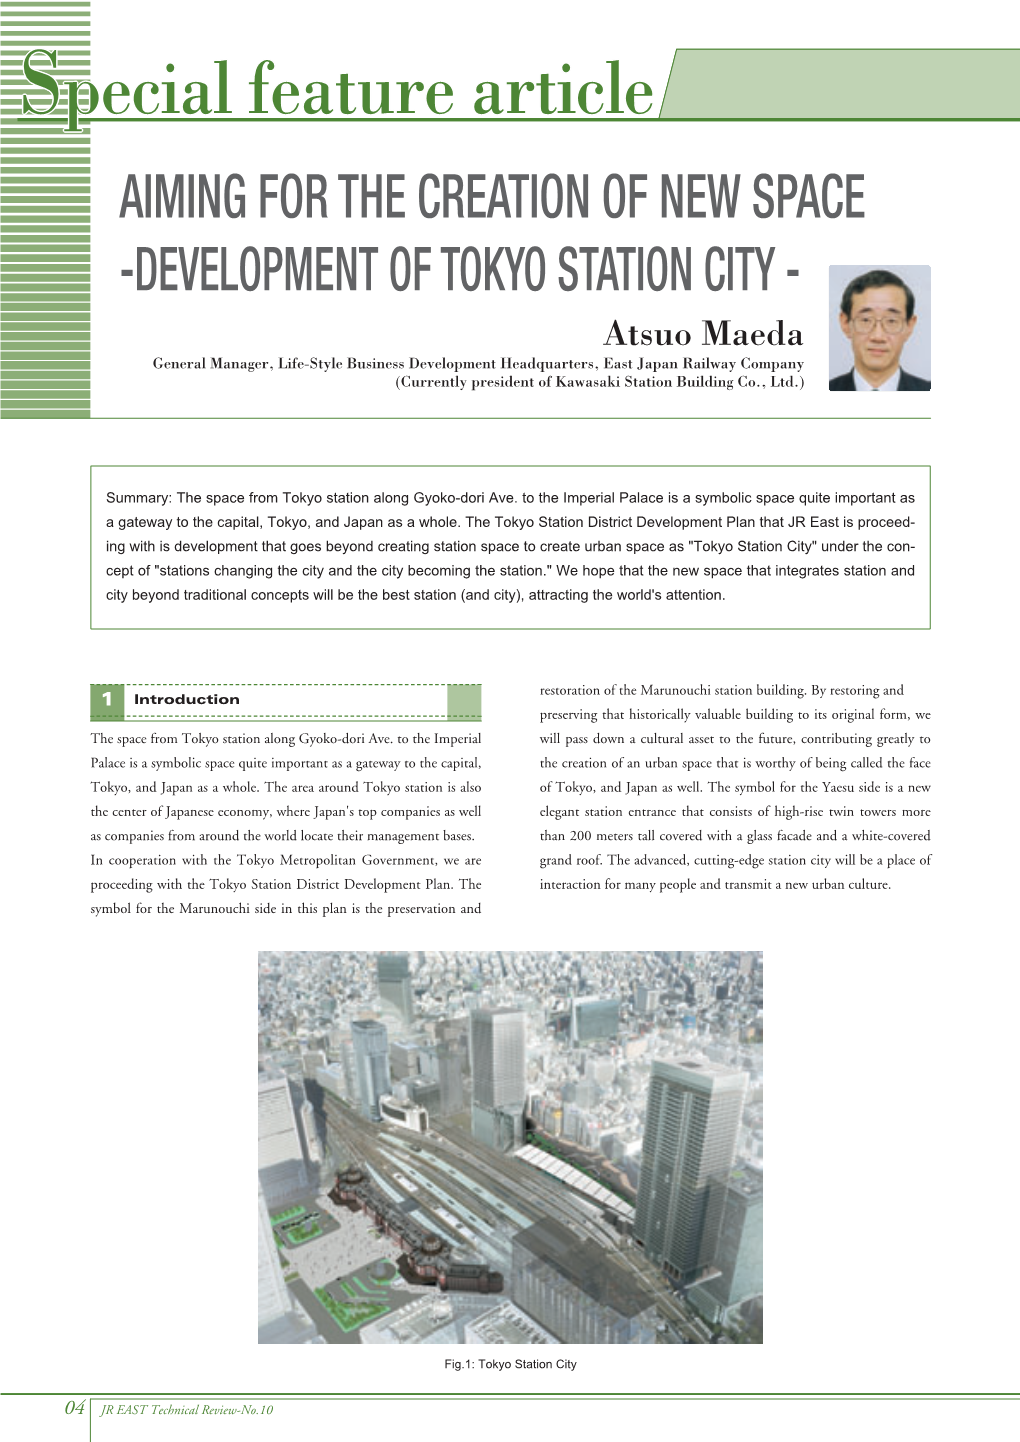 Aiming for the Creation of New Space -Development of Tokyo Station City